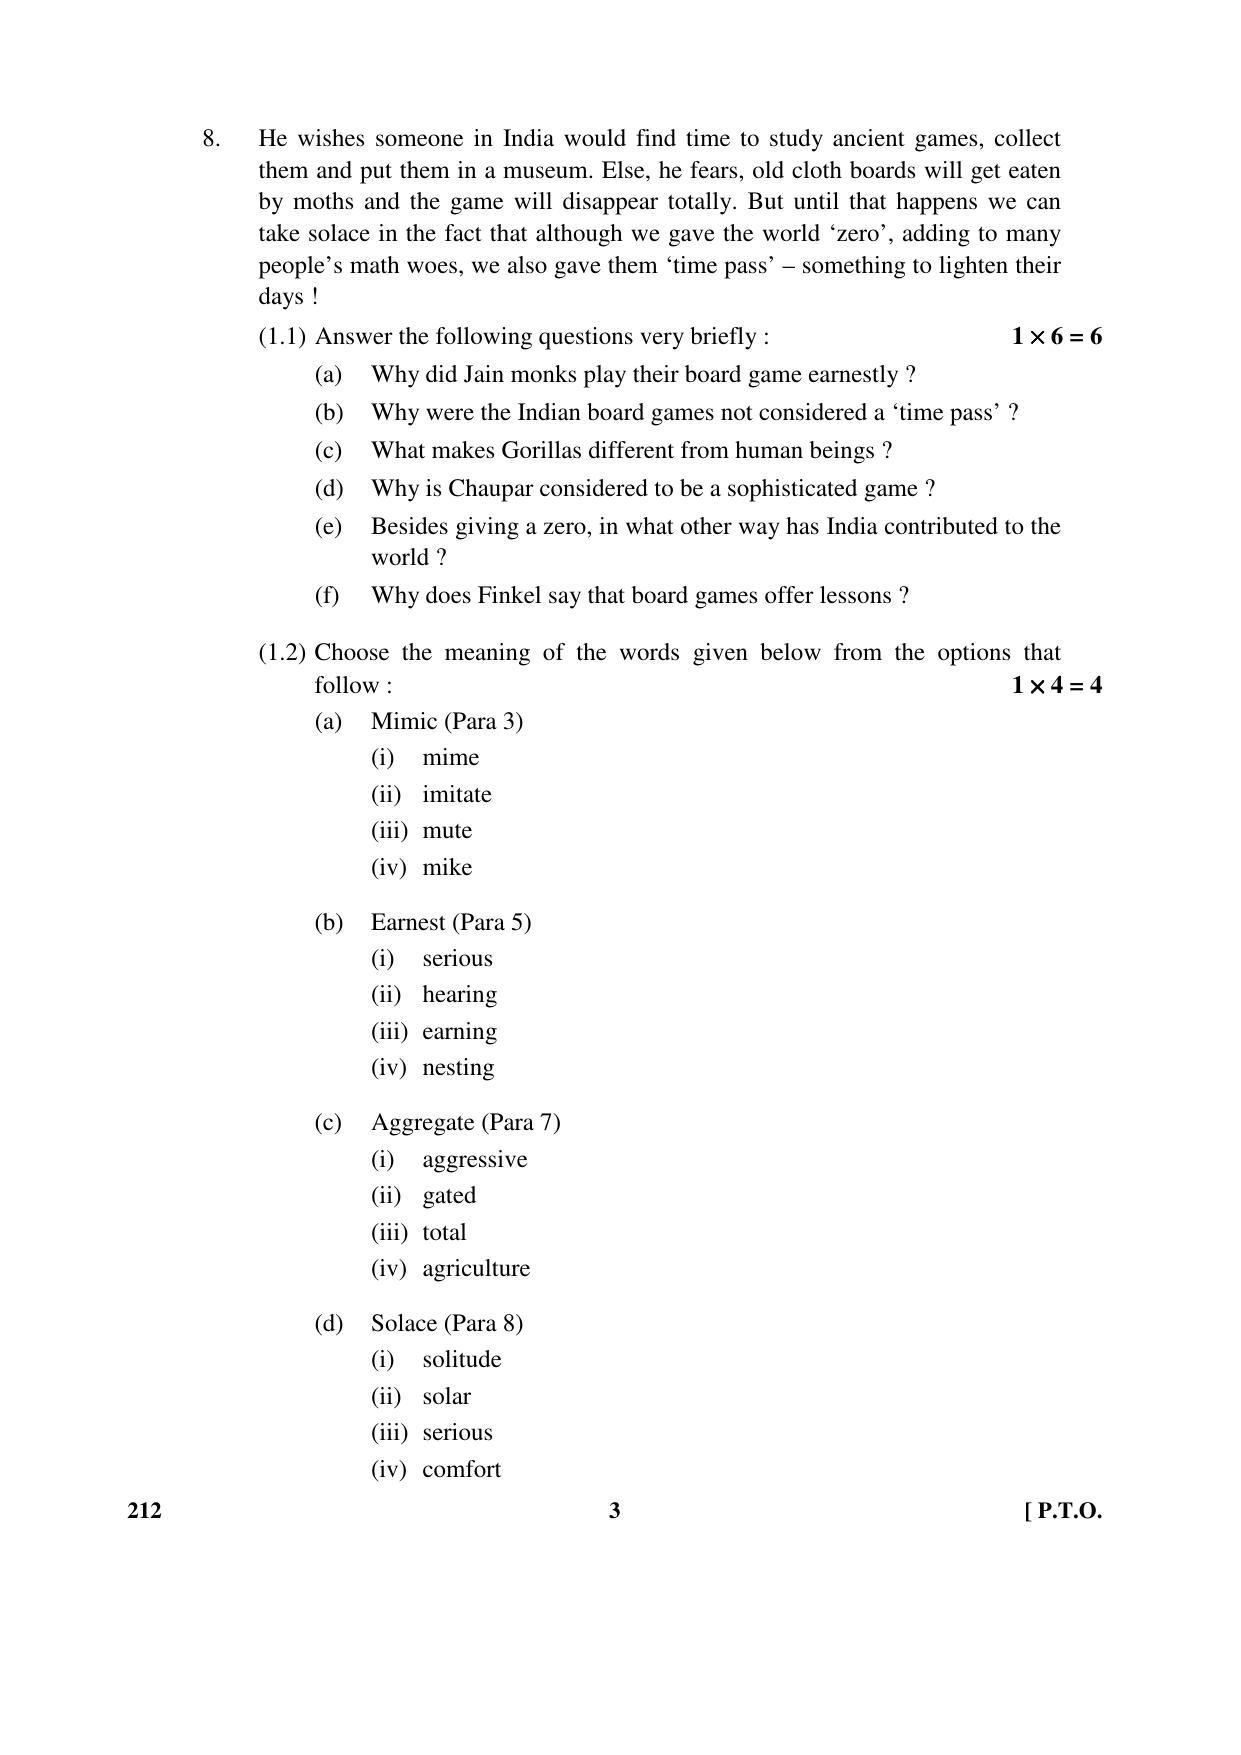 CBSE Class 12 212 _English (Elective) 2017 Question Paper - Page 3